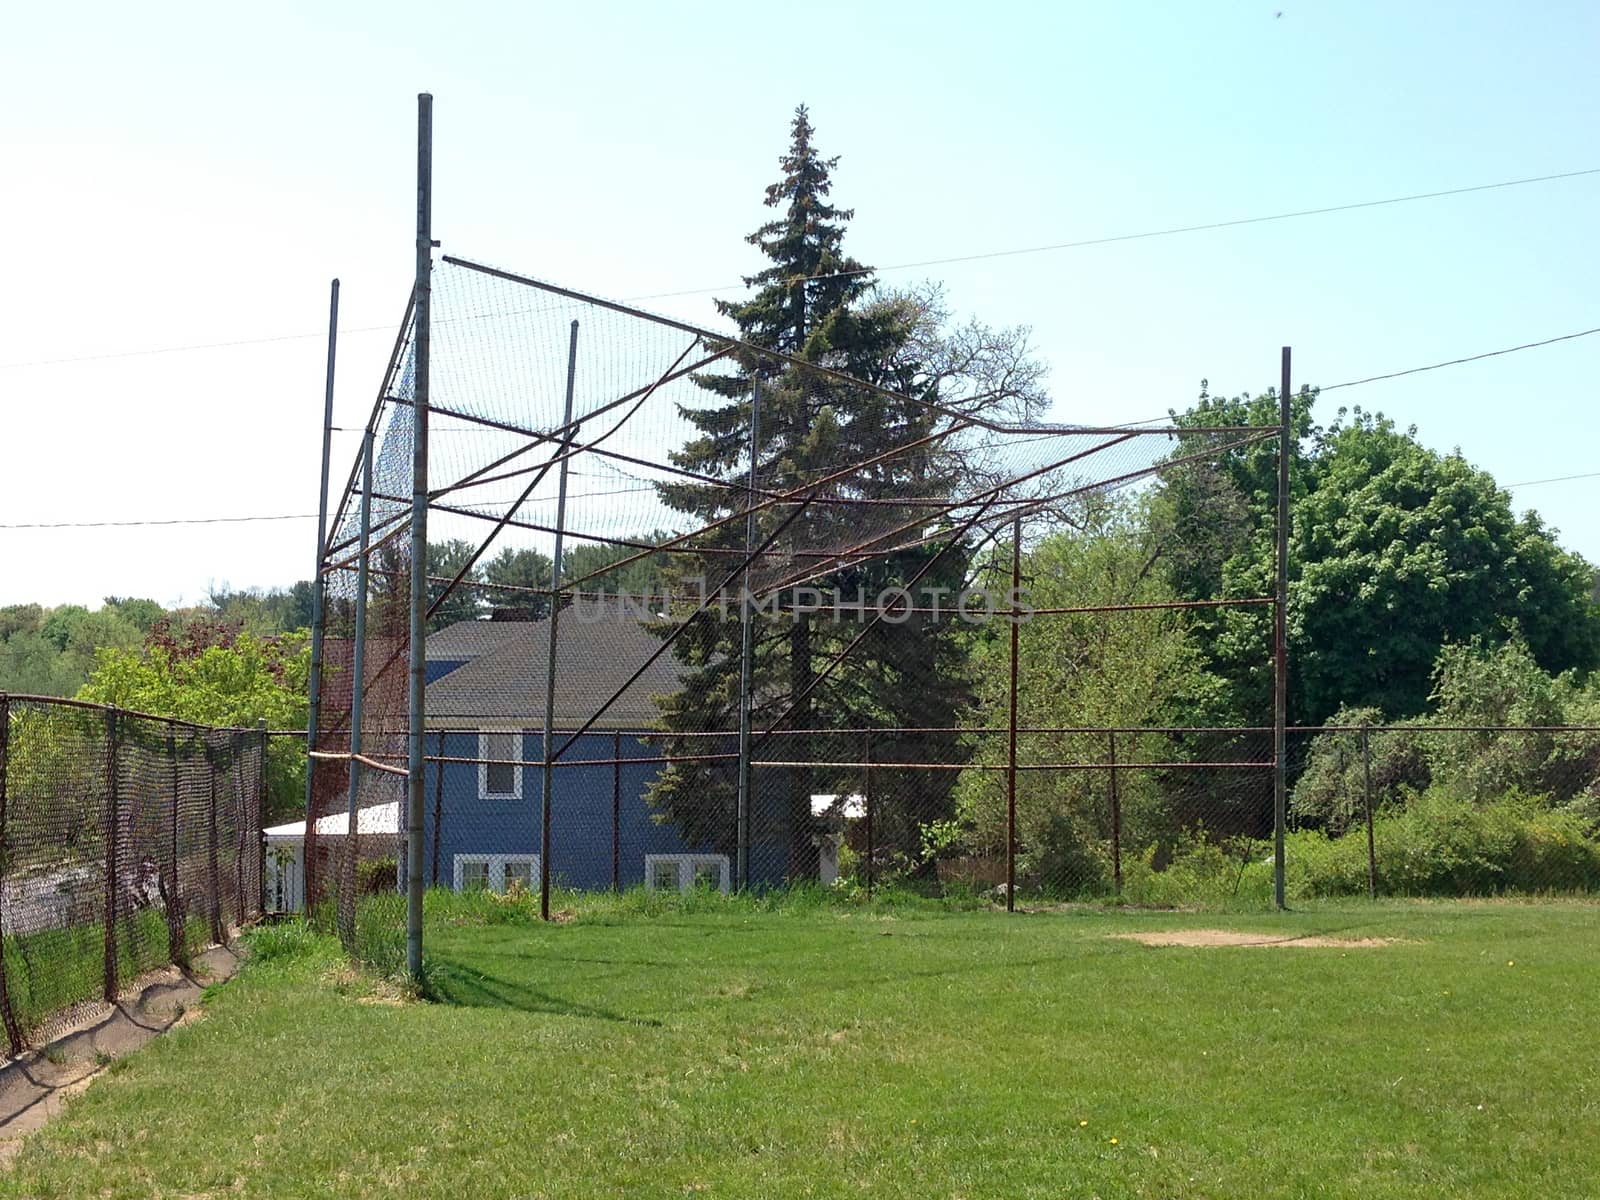 Baseball field and backstop in the suburb.